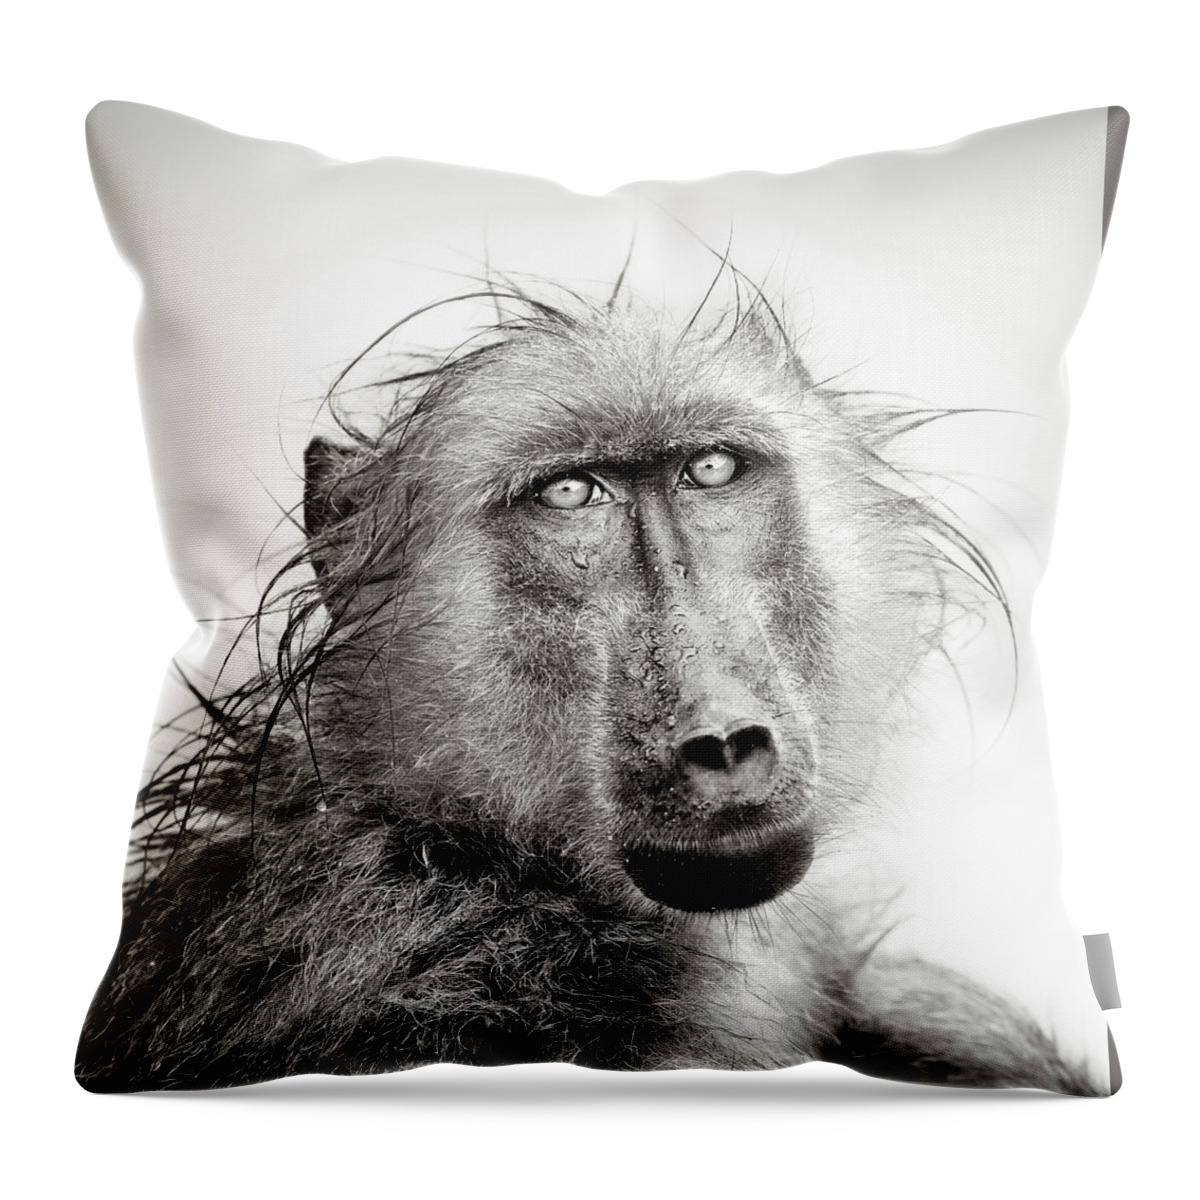 Baboon Throw Pillow featuring the photograph Wet Baboon portrait by Johan Swanepoel